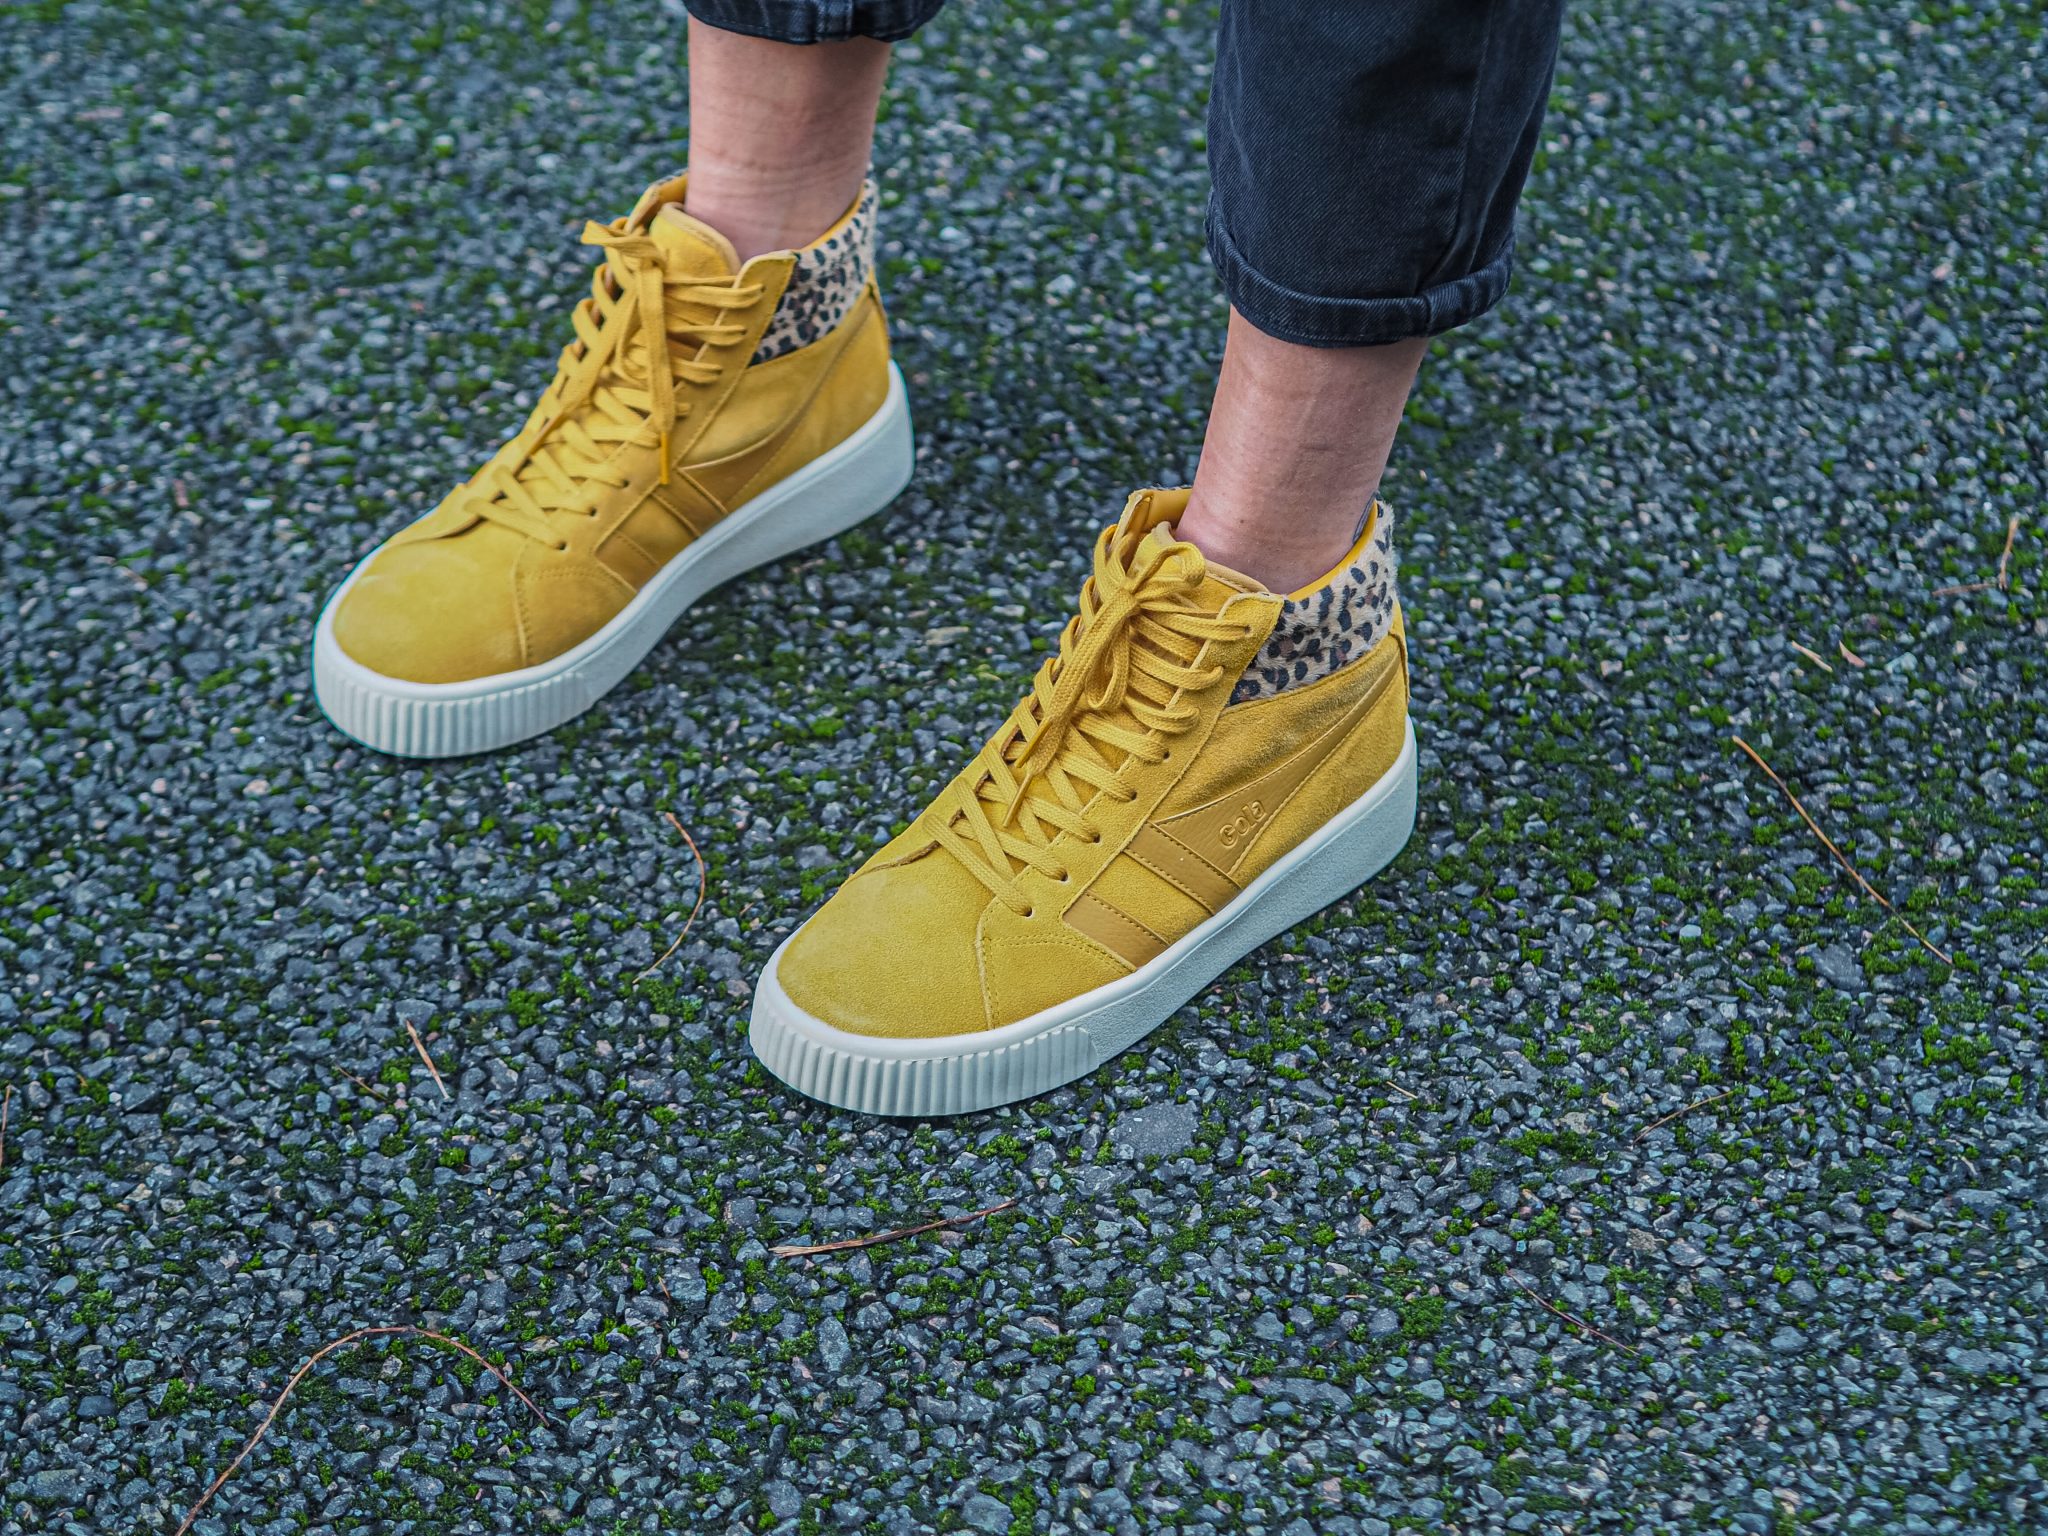 Laura Kate Lucas - Manchester Fashion, Lifestyle and Food Blogger | Gola Classics Womens Baseline Savanna Trainers